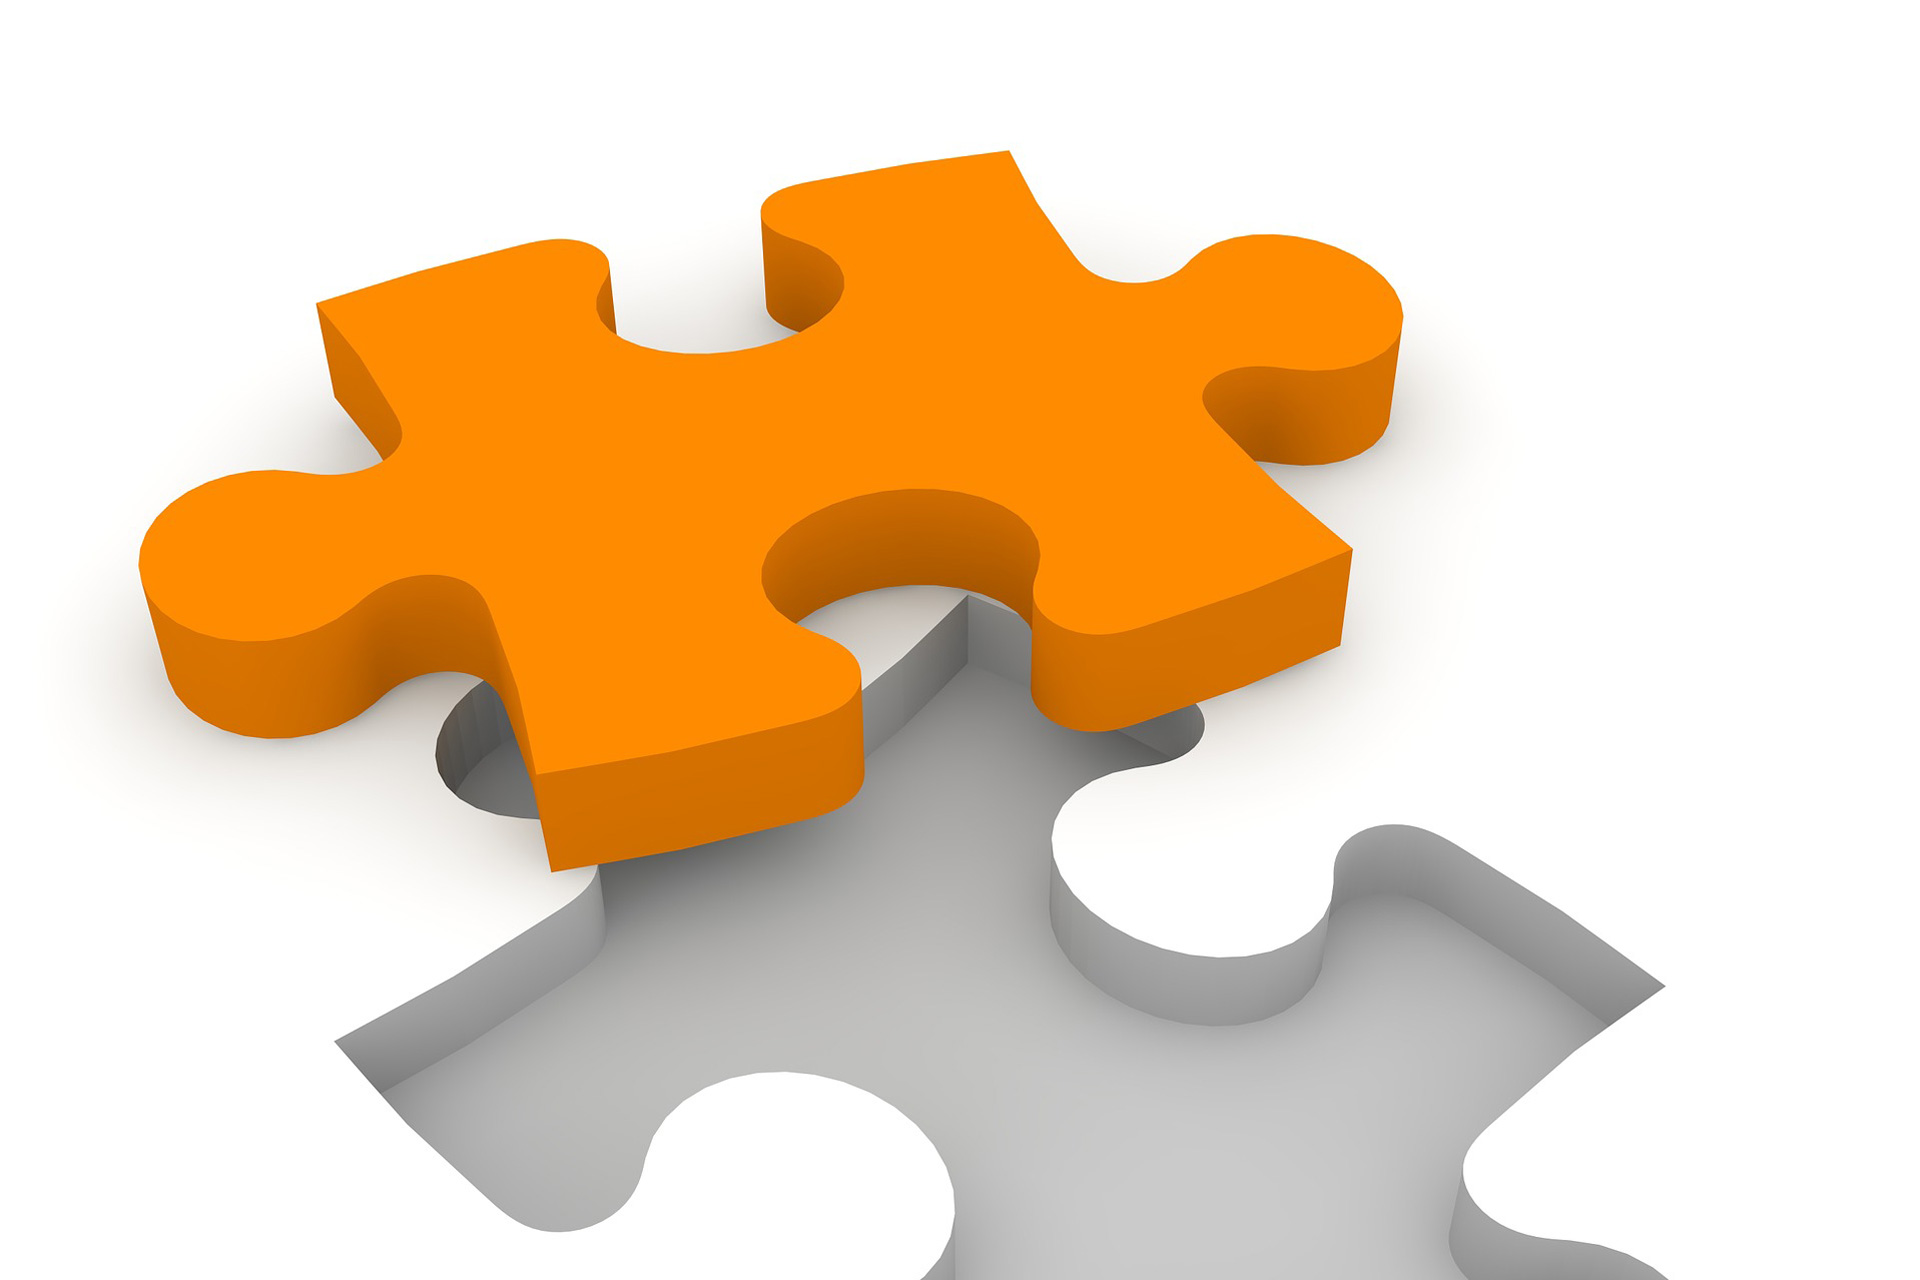 Puzzle piece in orange about to be placed. Illustrates the key piece to a FP&A system concept.